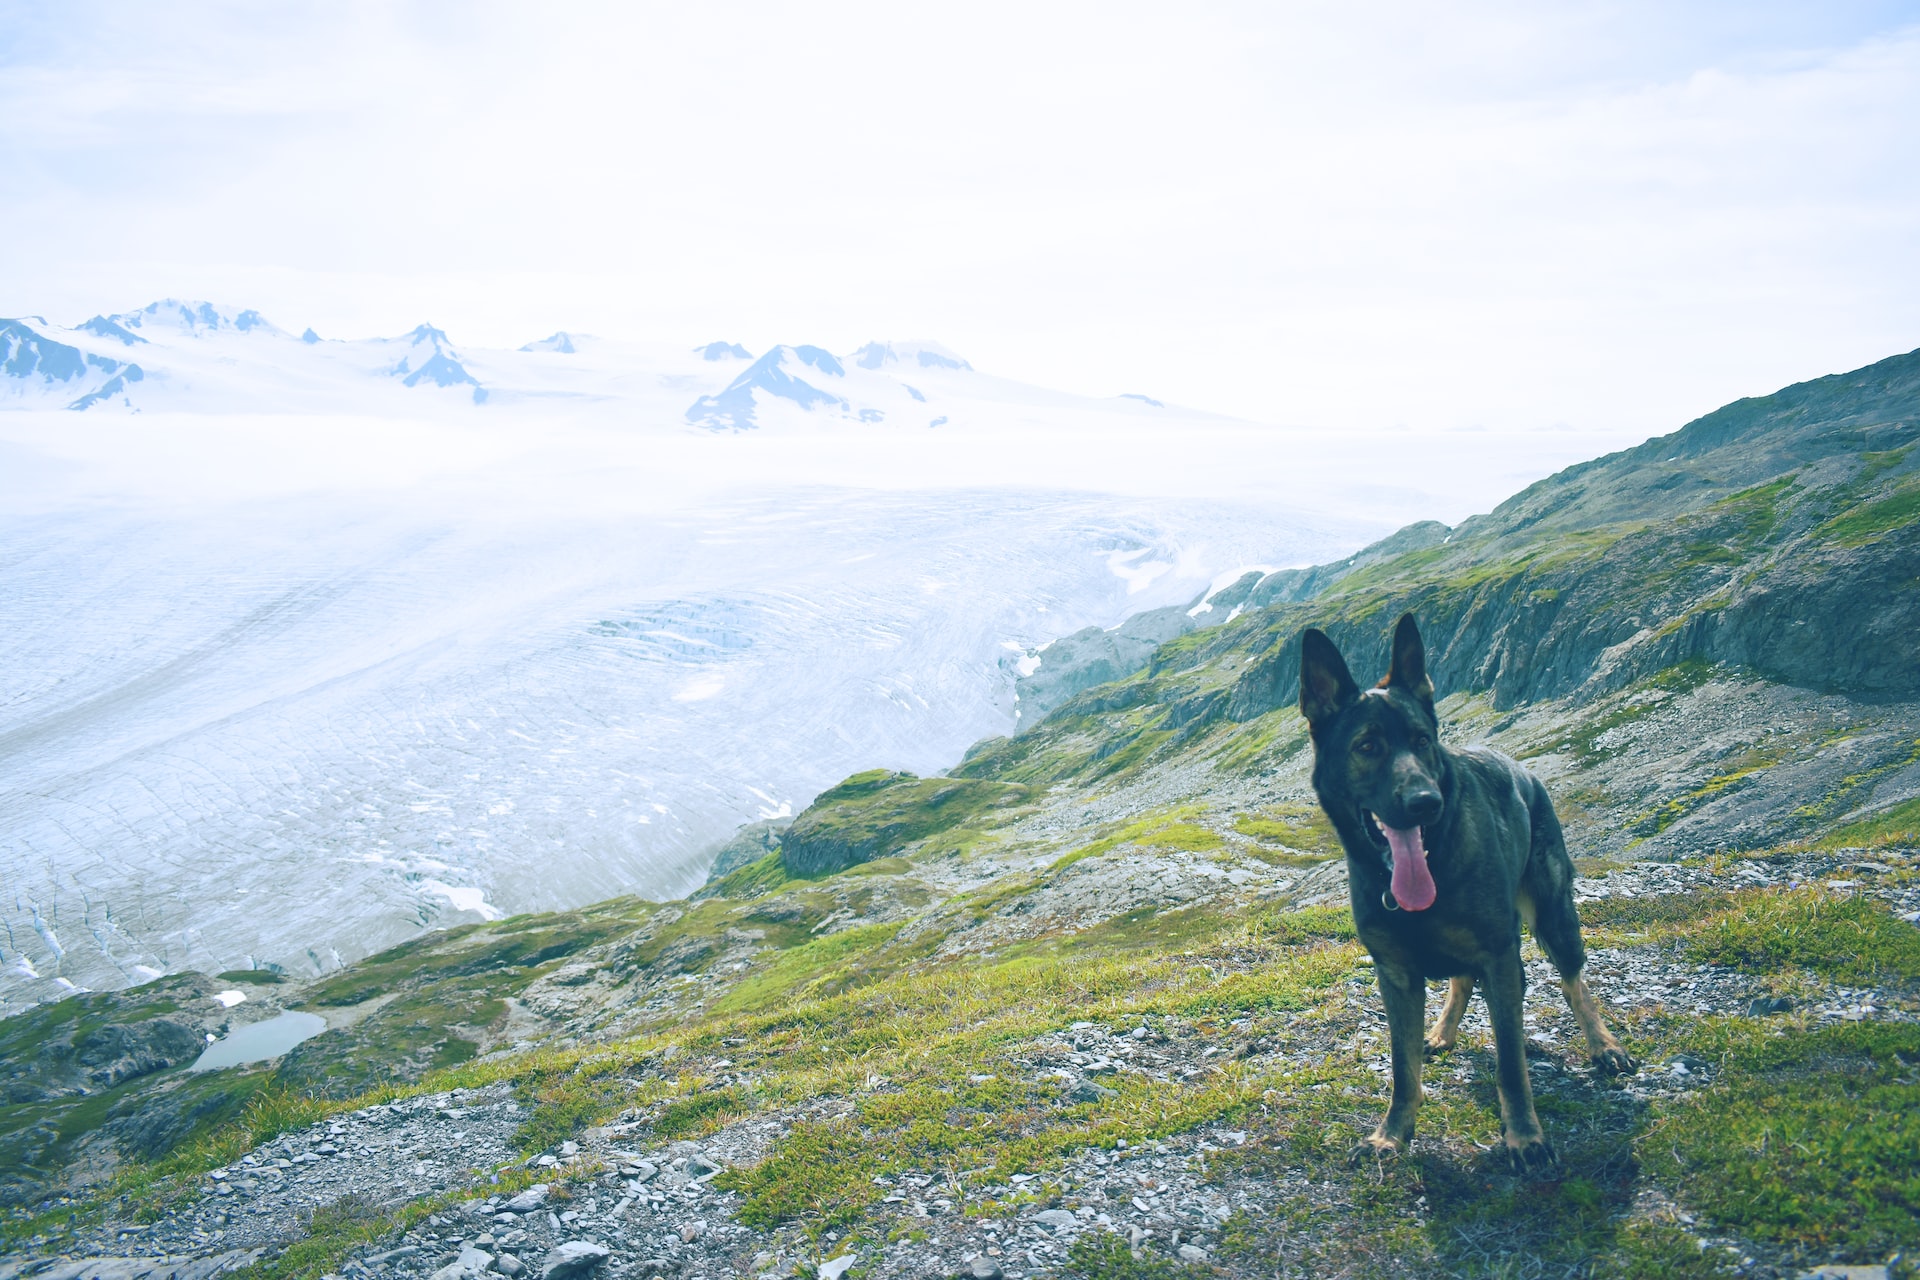 Black dog standing on a mountain with lush green grass and flowers